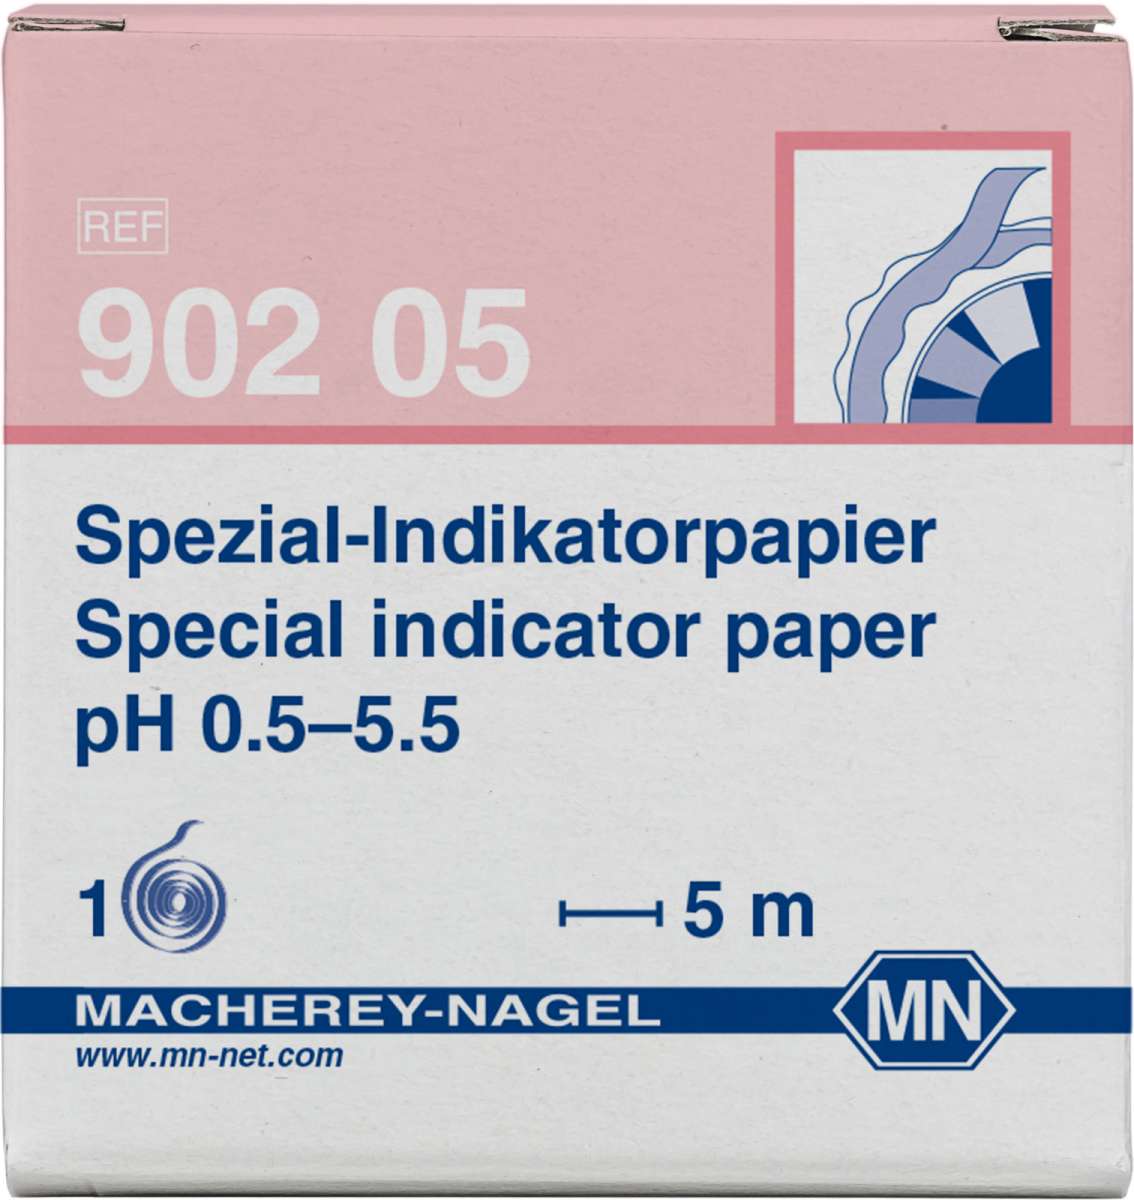 Special indicator paper pH 0.5 to 5.5 (Reel of 5m length and 7mm width)